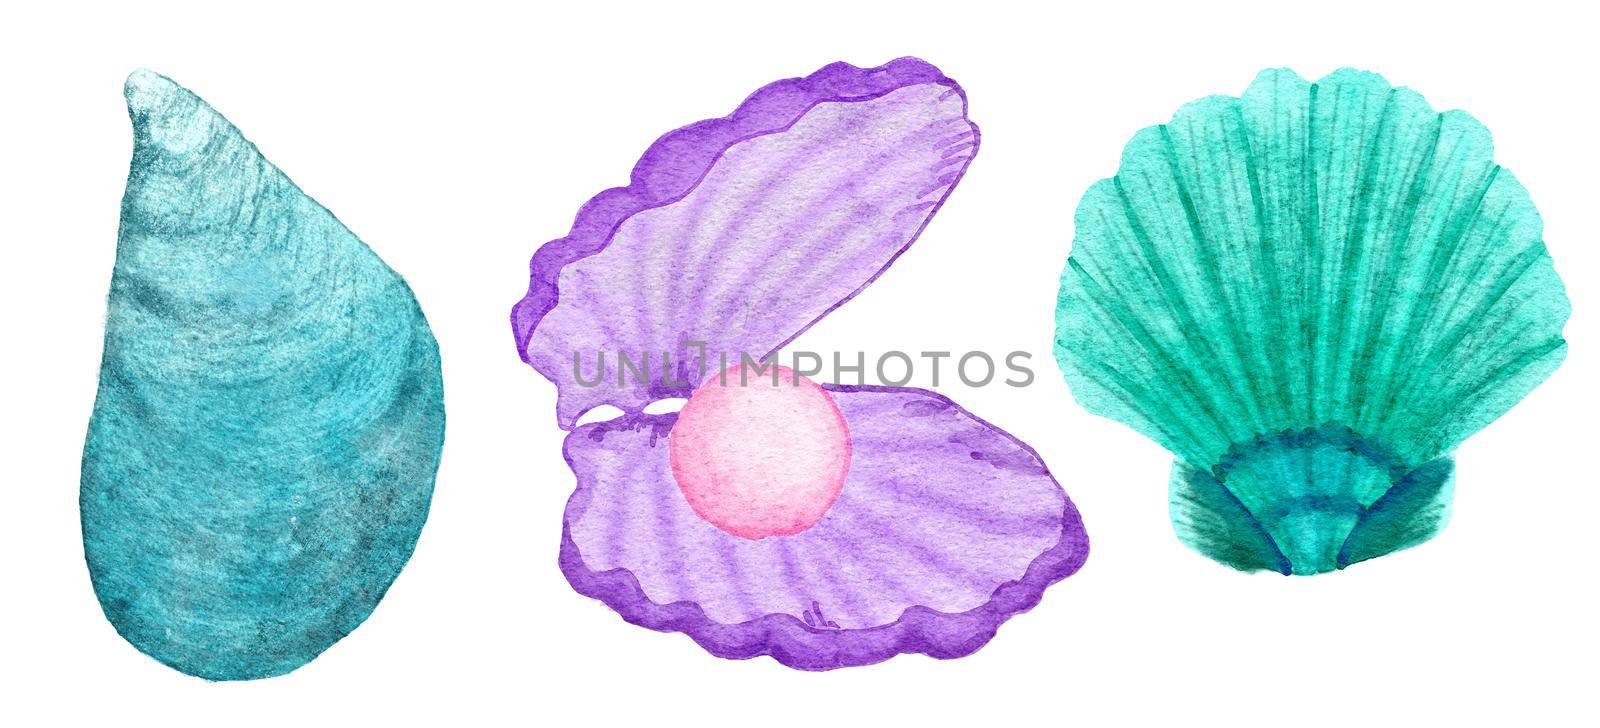 Watercolor illustration of shells, clam shell in blue turquoise purple colors, ocean sea underwater wildlife animals. Nautical summer beach design, coral reef life nature. by Lagmar